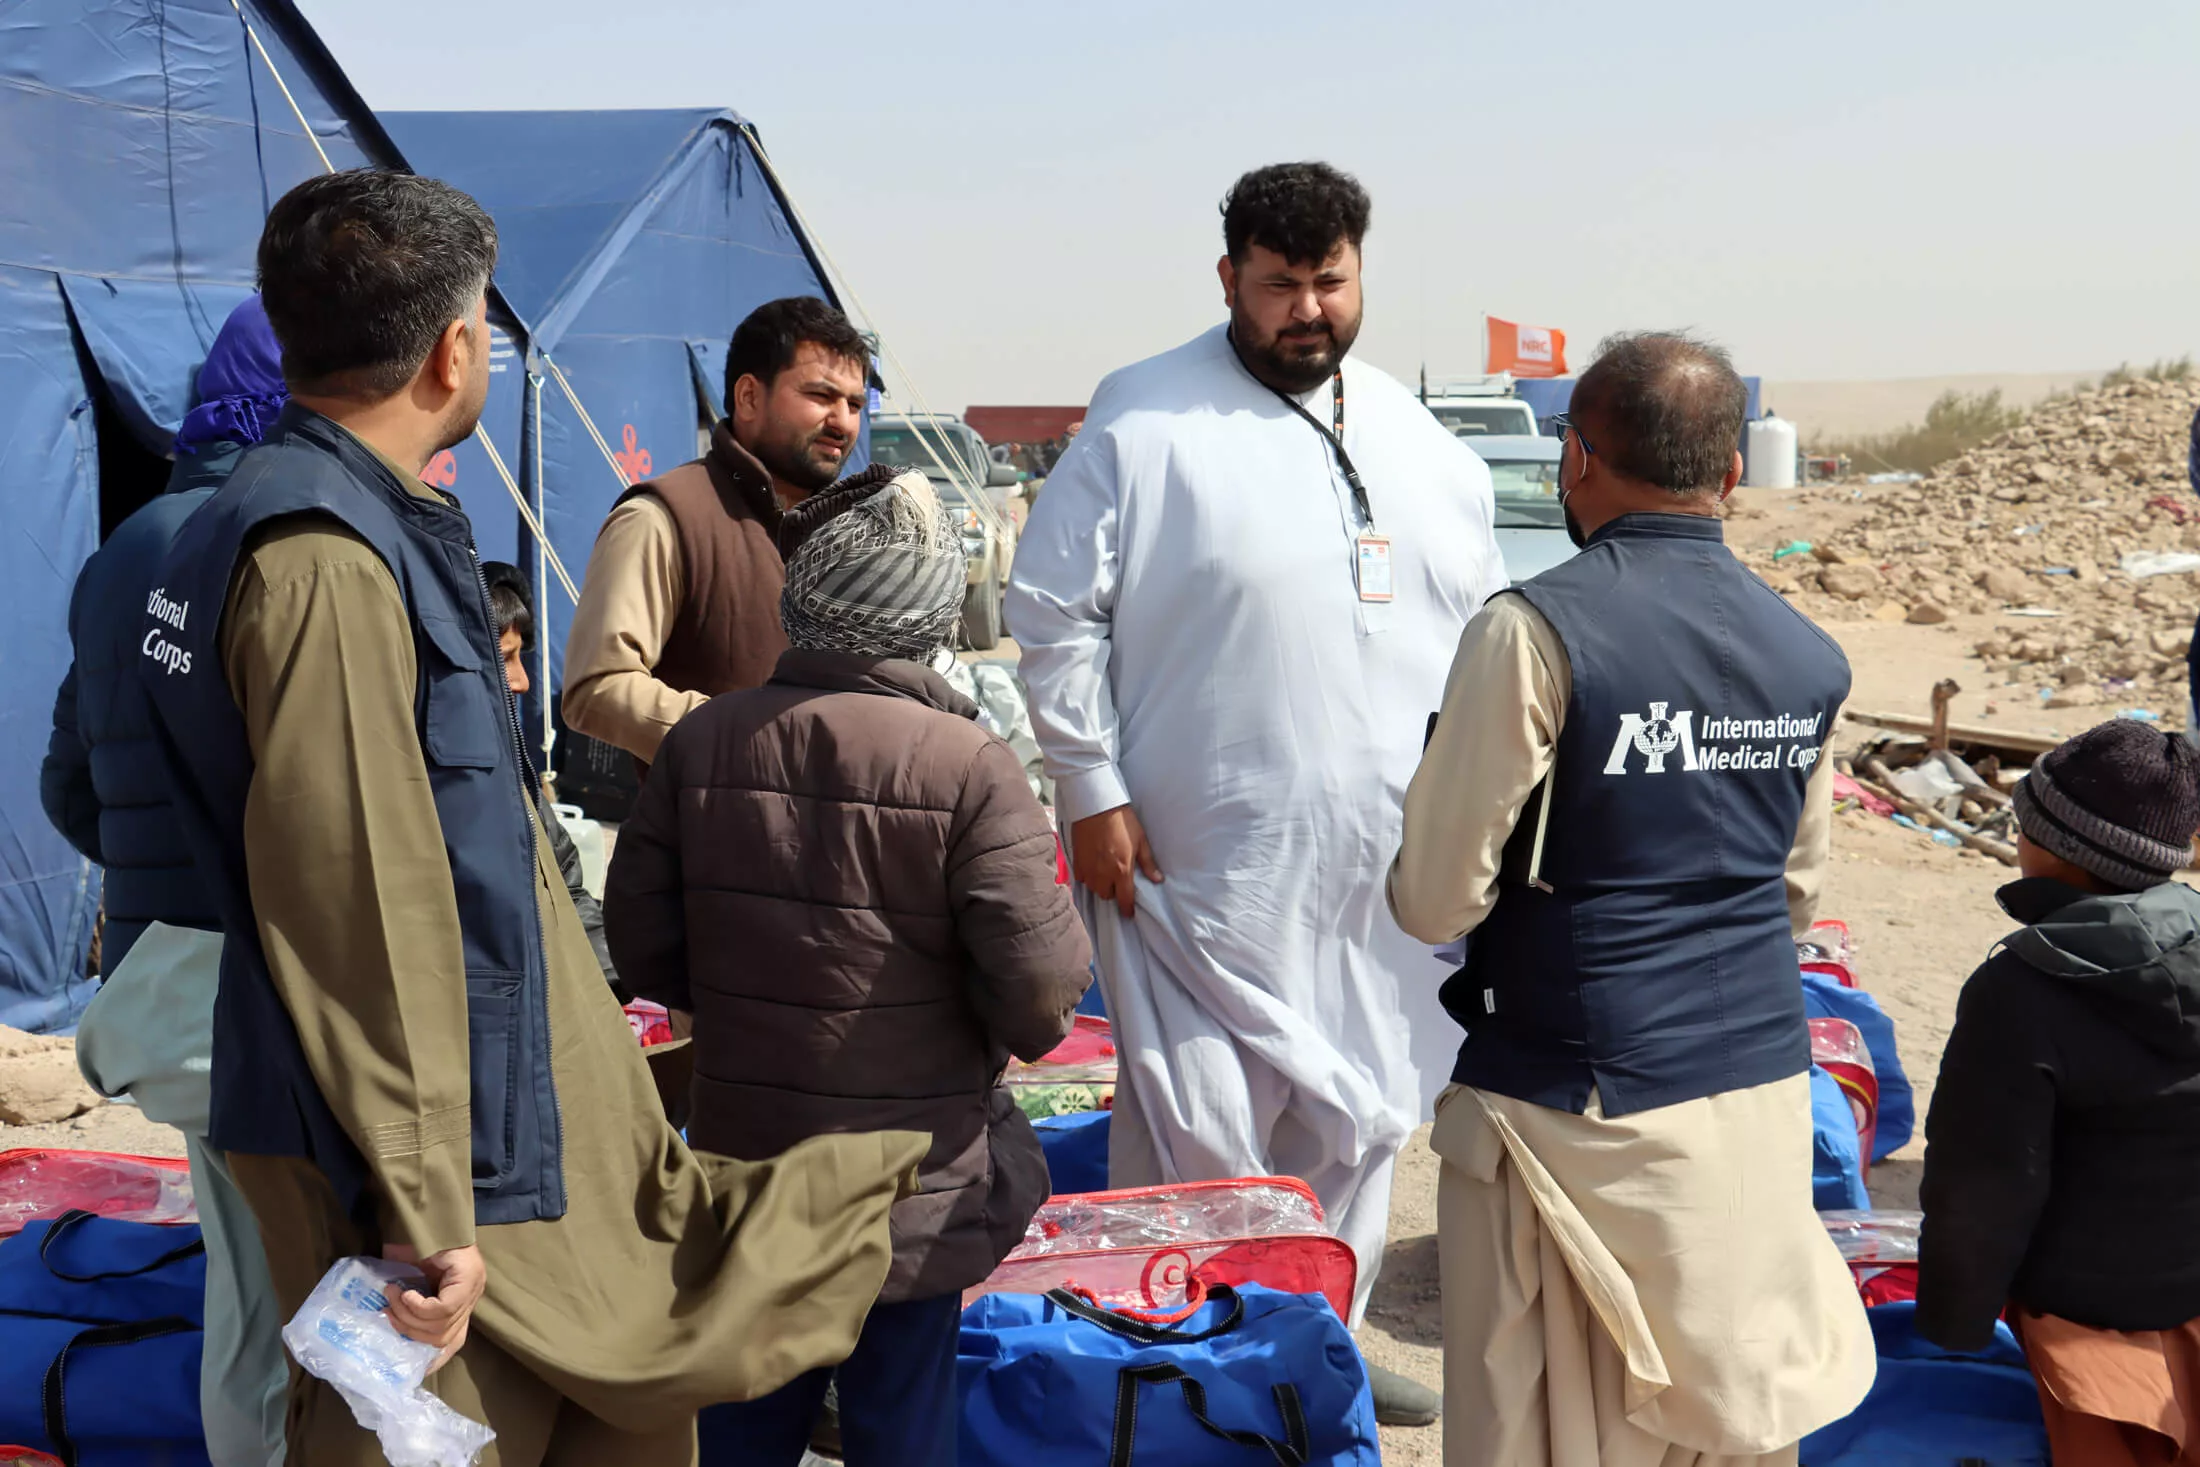 International Medical Corps delivers winterization packages to affected communities in Herat.